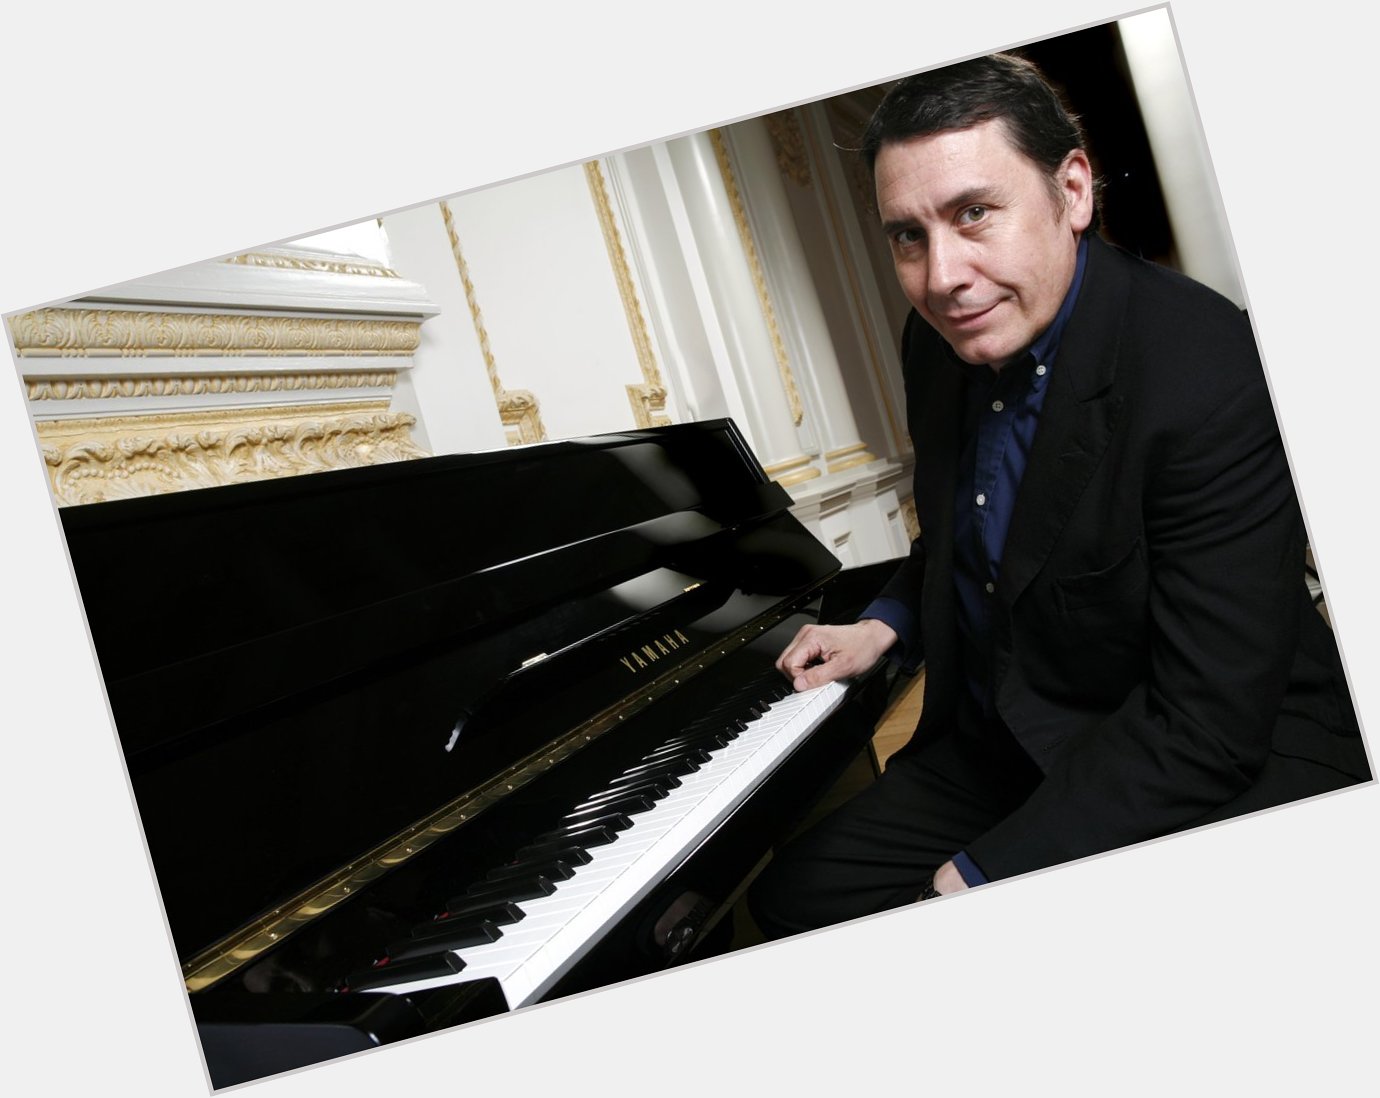 Please join me here at in wishing the one and only Jools Holland a very Happy 63rd Birthday today  